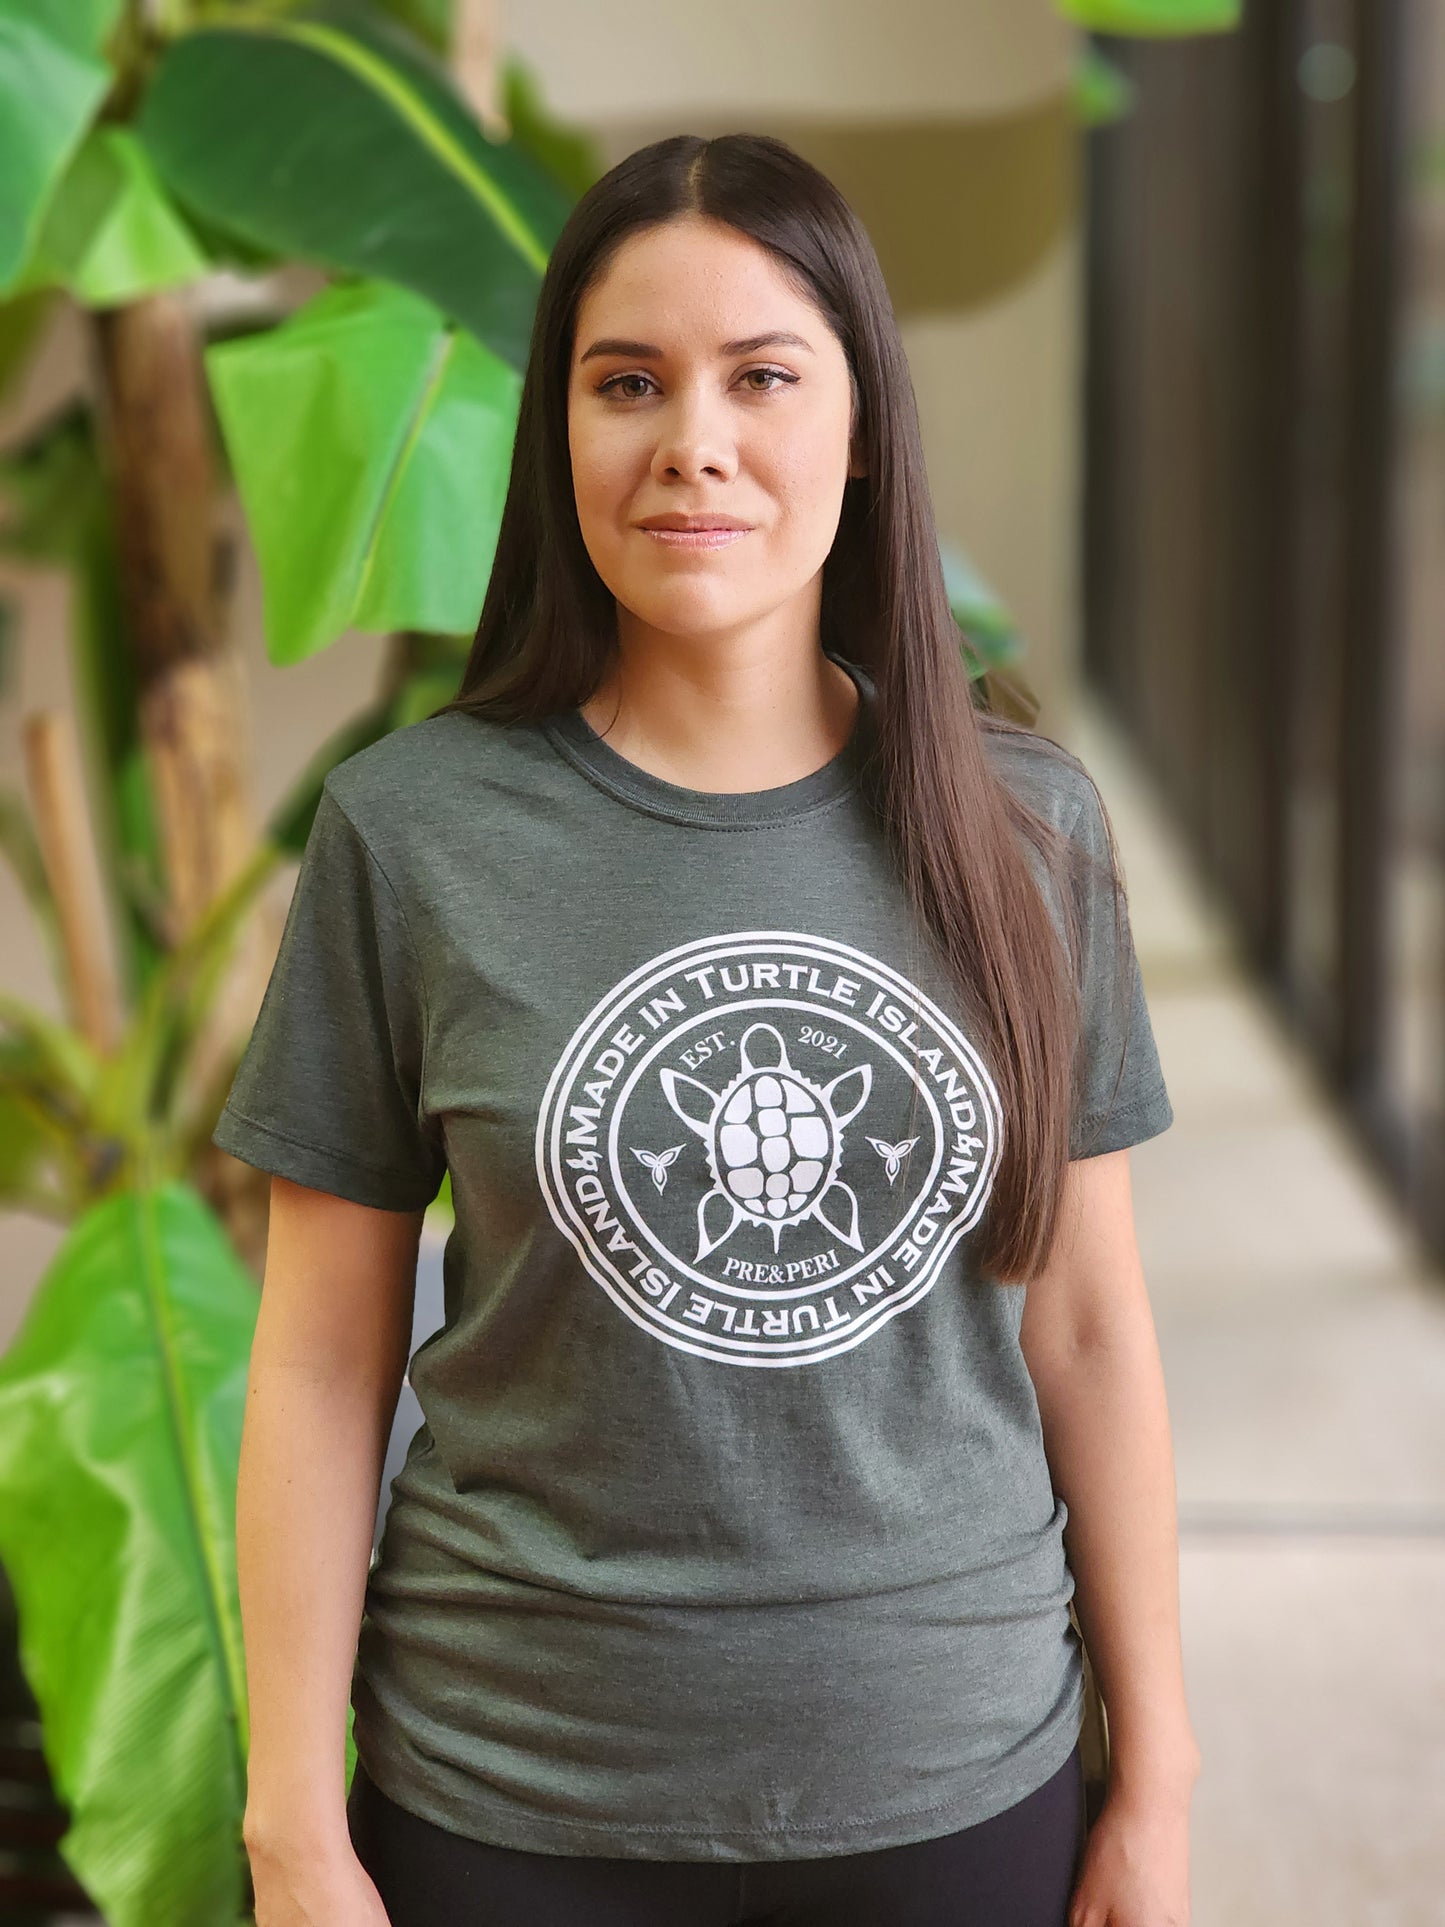 A woman wearing a forest green heather t-shirt with a white print of a turtle in the centre of a circle with words "Made in Turtle Island" around it twice